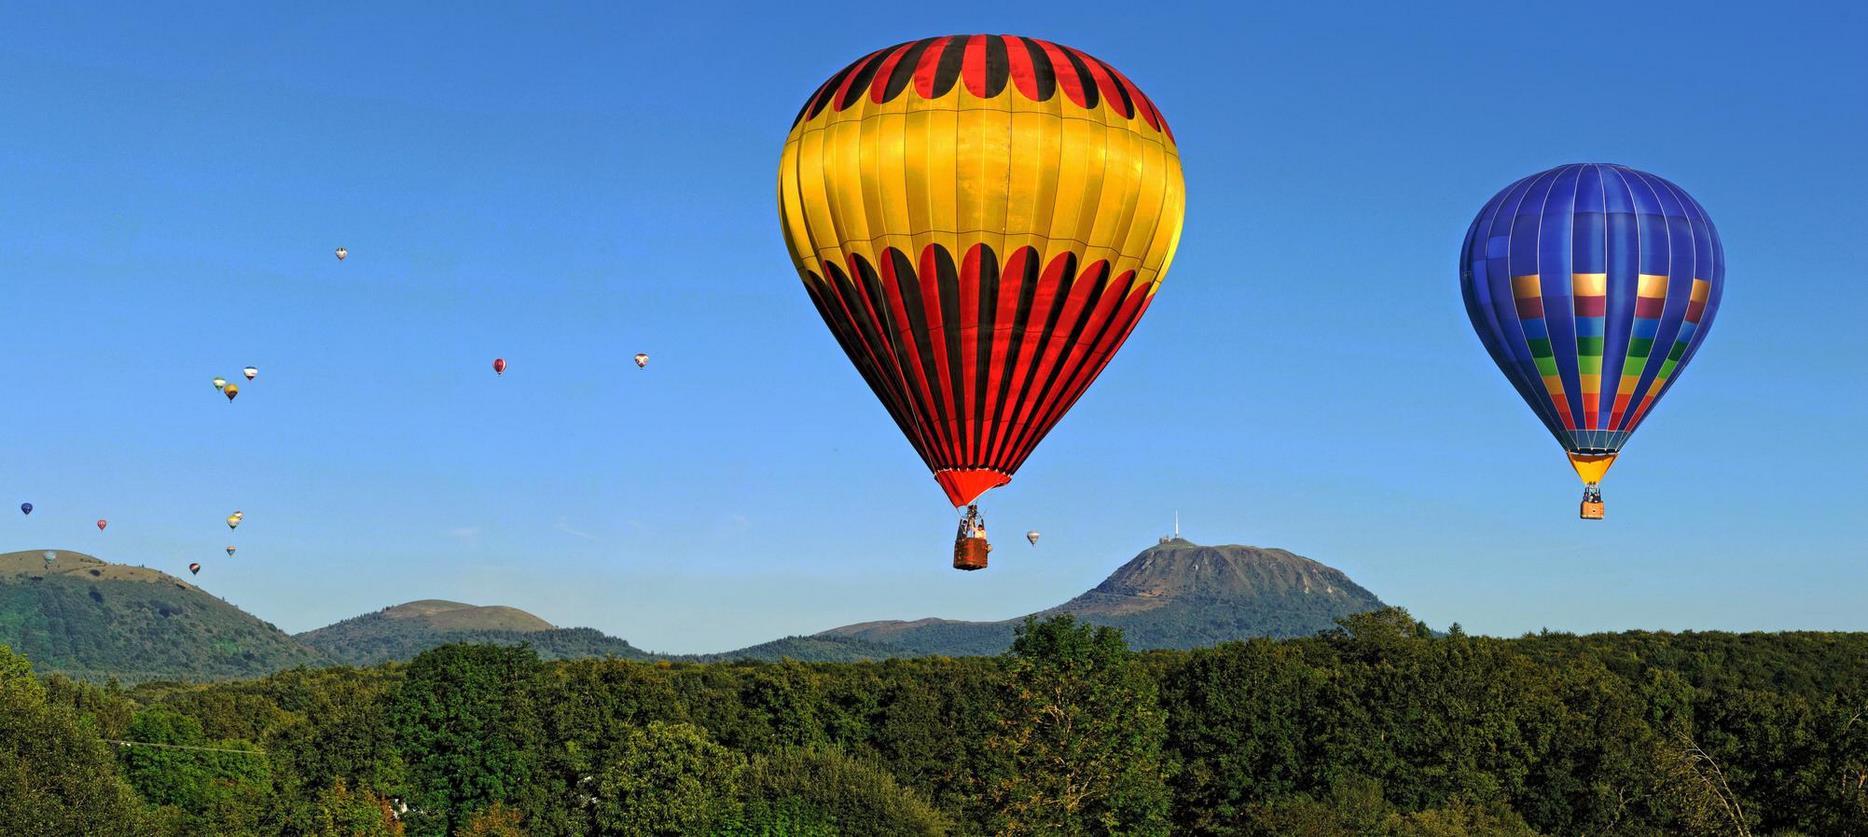 Hot air ballooning in the Auvergne Volcanoes Natural Park